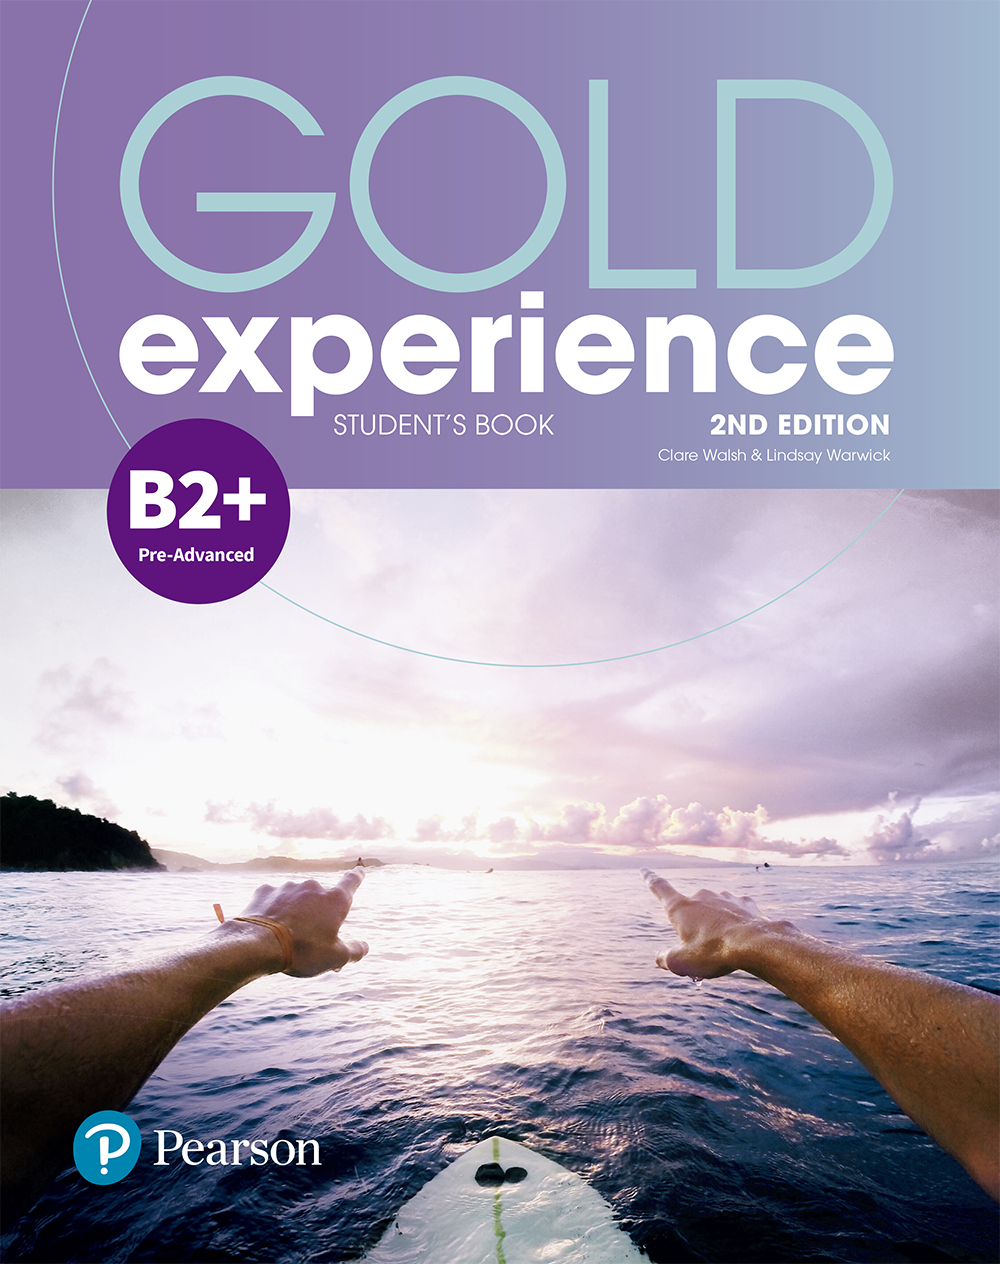 Cambridge English First for Schools Gold Experience 2nd Edition Exam Practice B2 